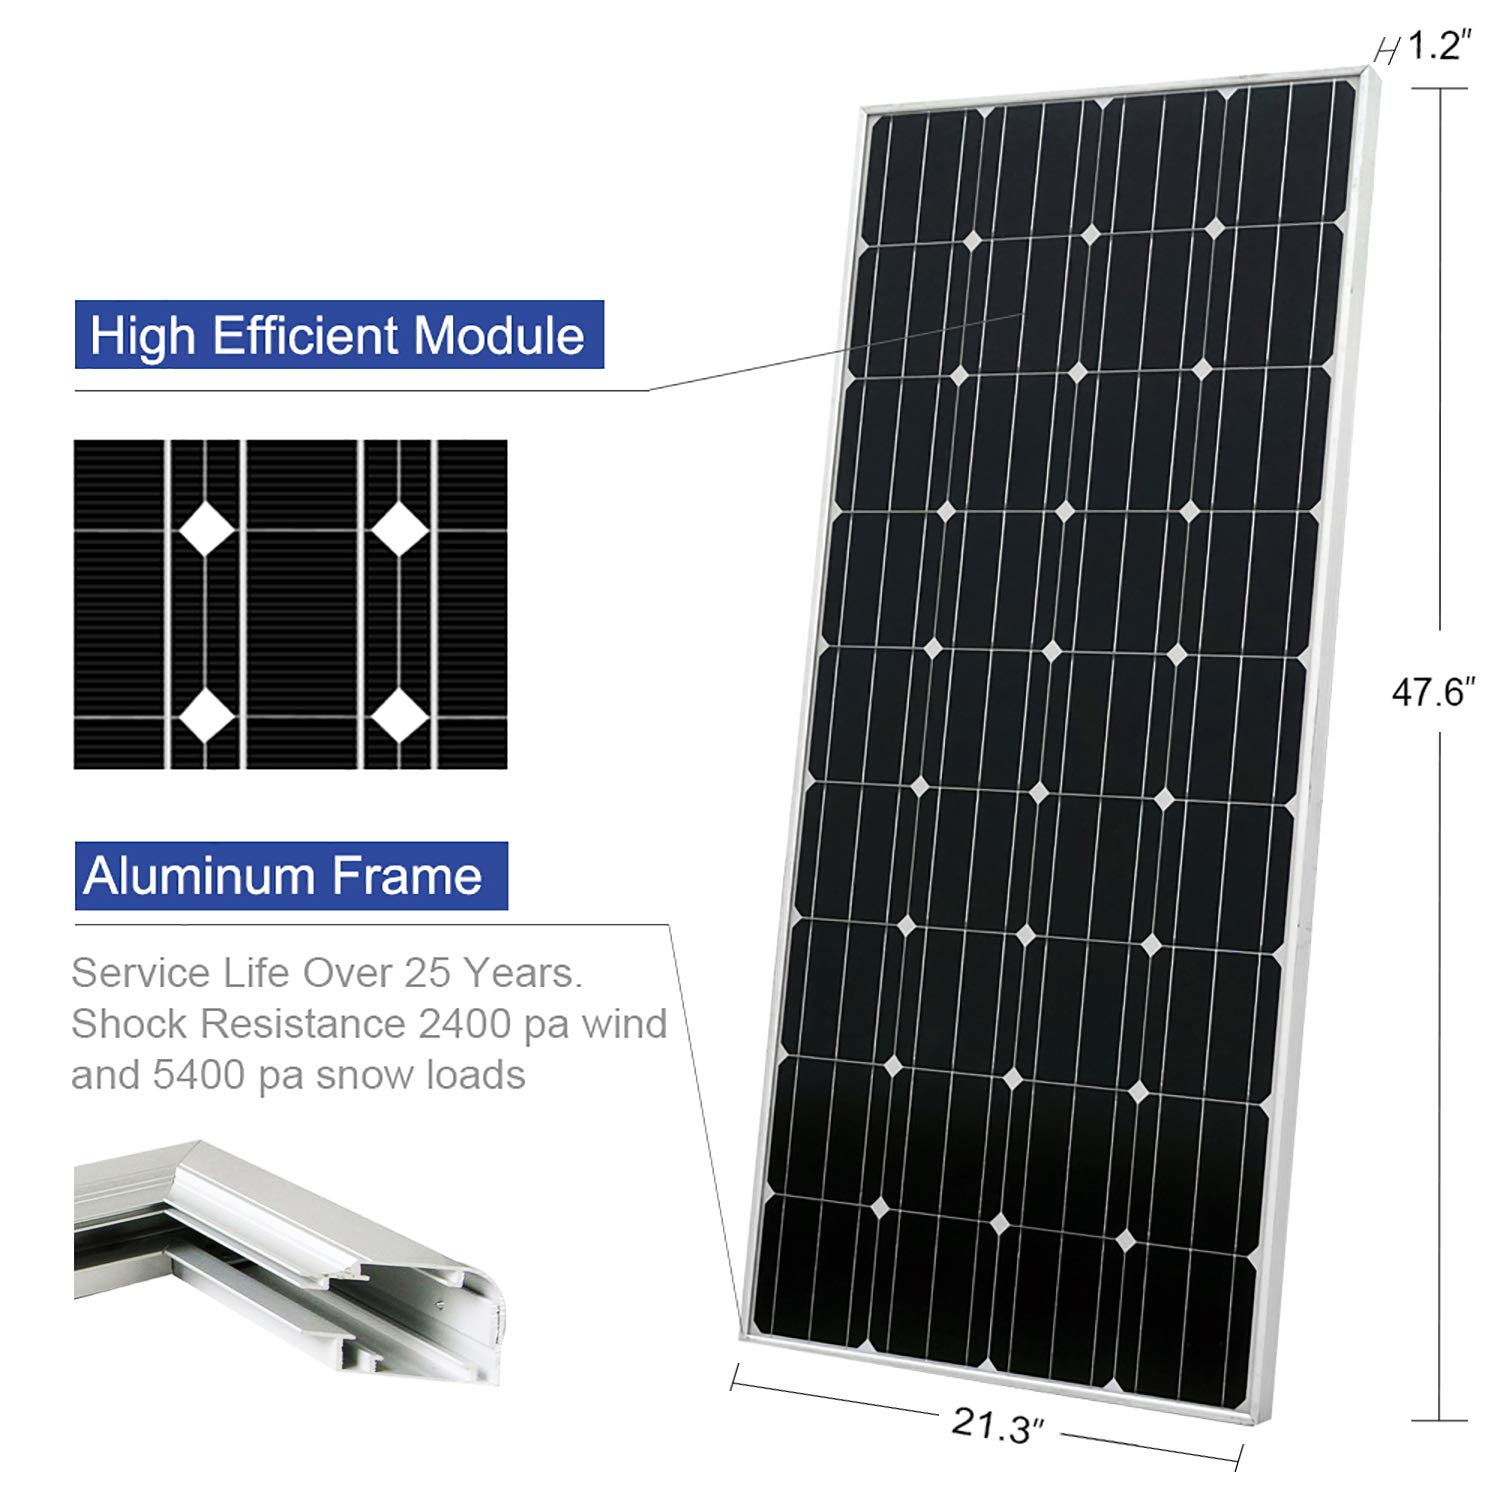 100 Watt Solar Panel 12 Volts Monocrystalline ELECTRICAL AND HOME APPLIANCE CDIVINE ANSWER